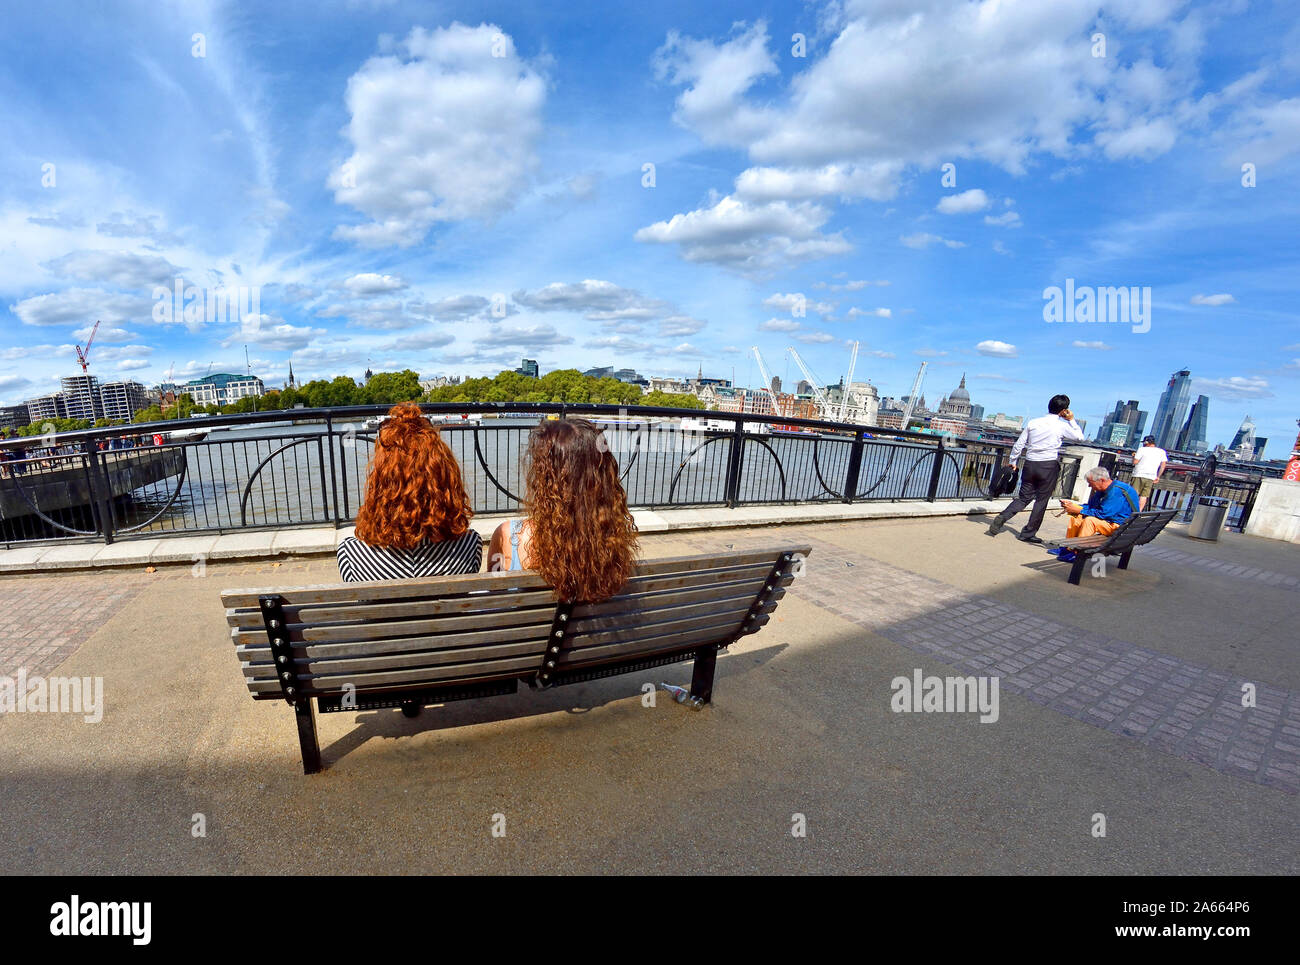 London, England, UK. Two young women sitting on a bench on the South Bank, looking over the River Thames Stock Photo